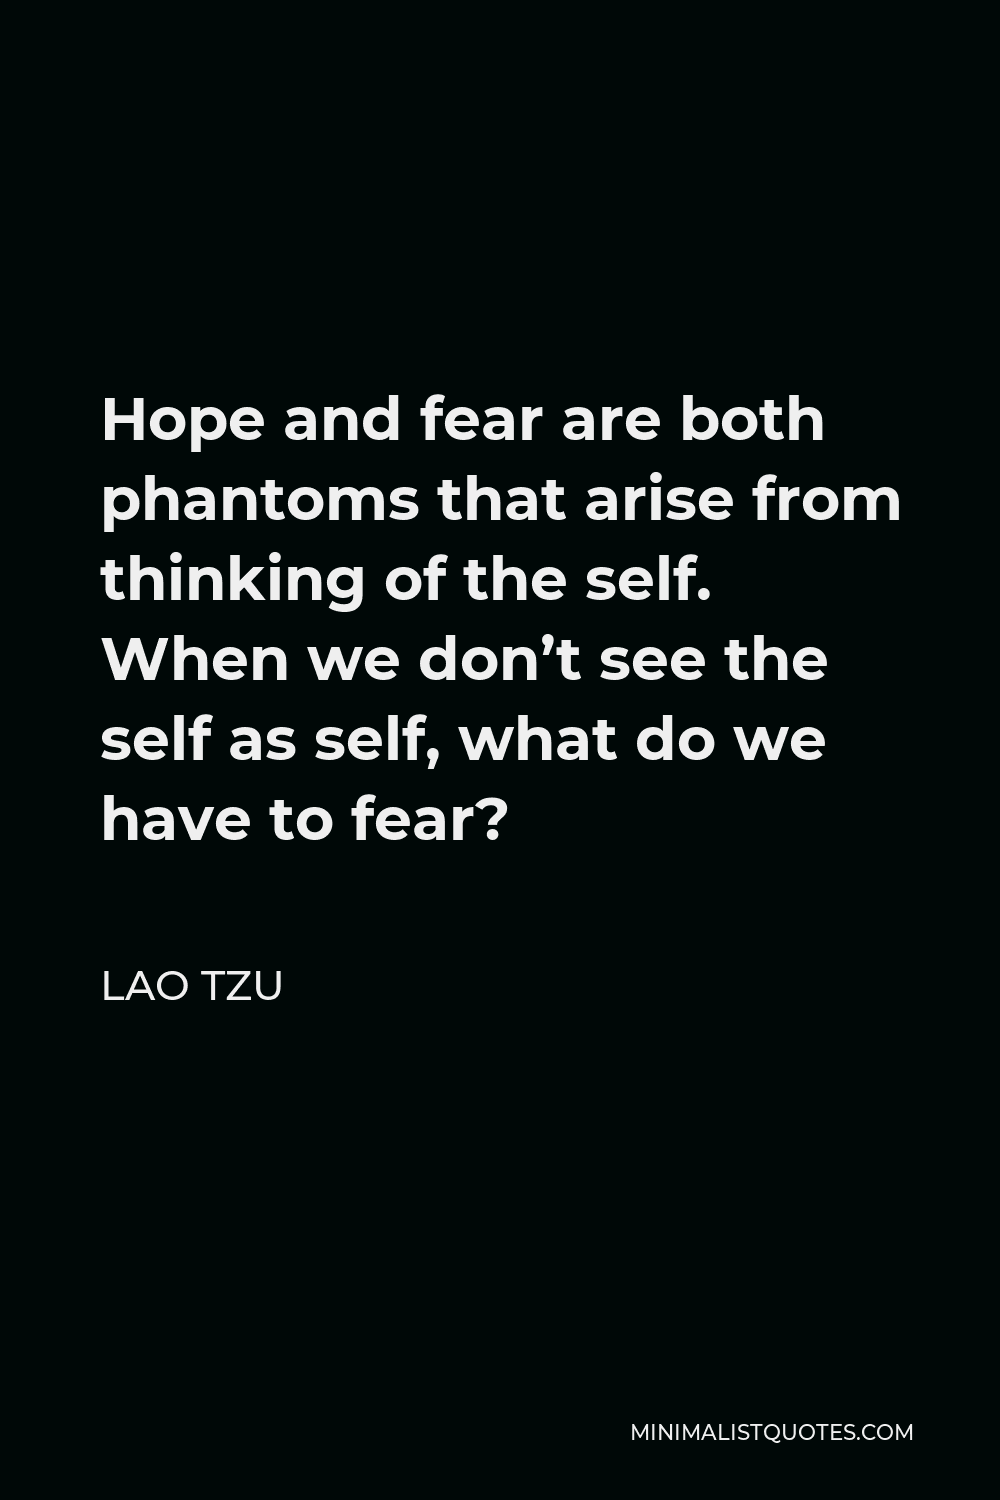 Lao Tzu Quote - Hope and fear are both phantoms that arise from thinking of the self. When we don’t see the self as self, what do we have to fear?